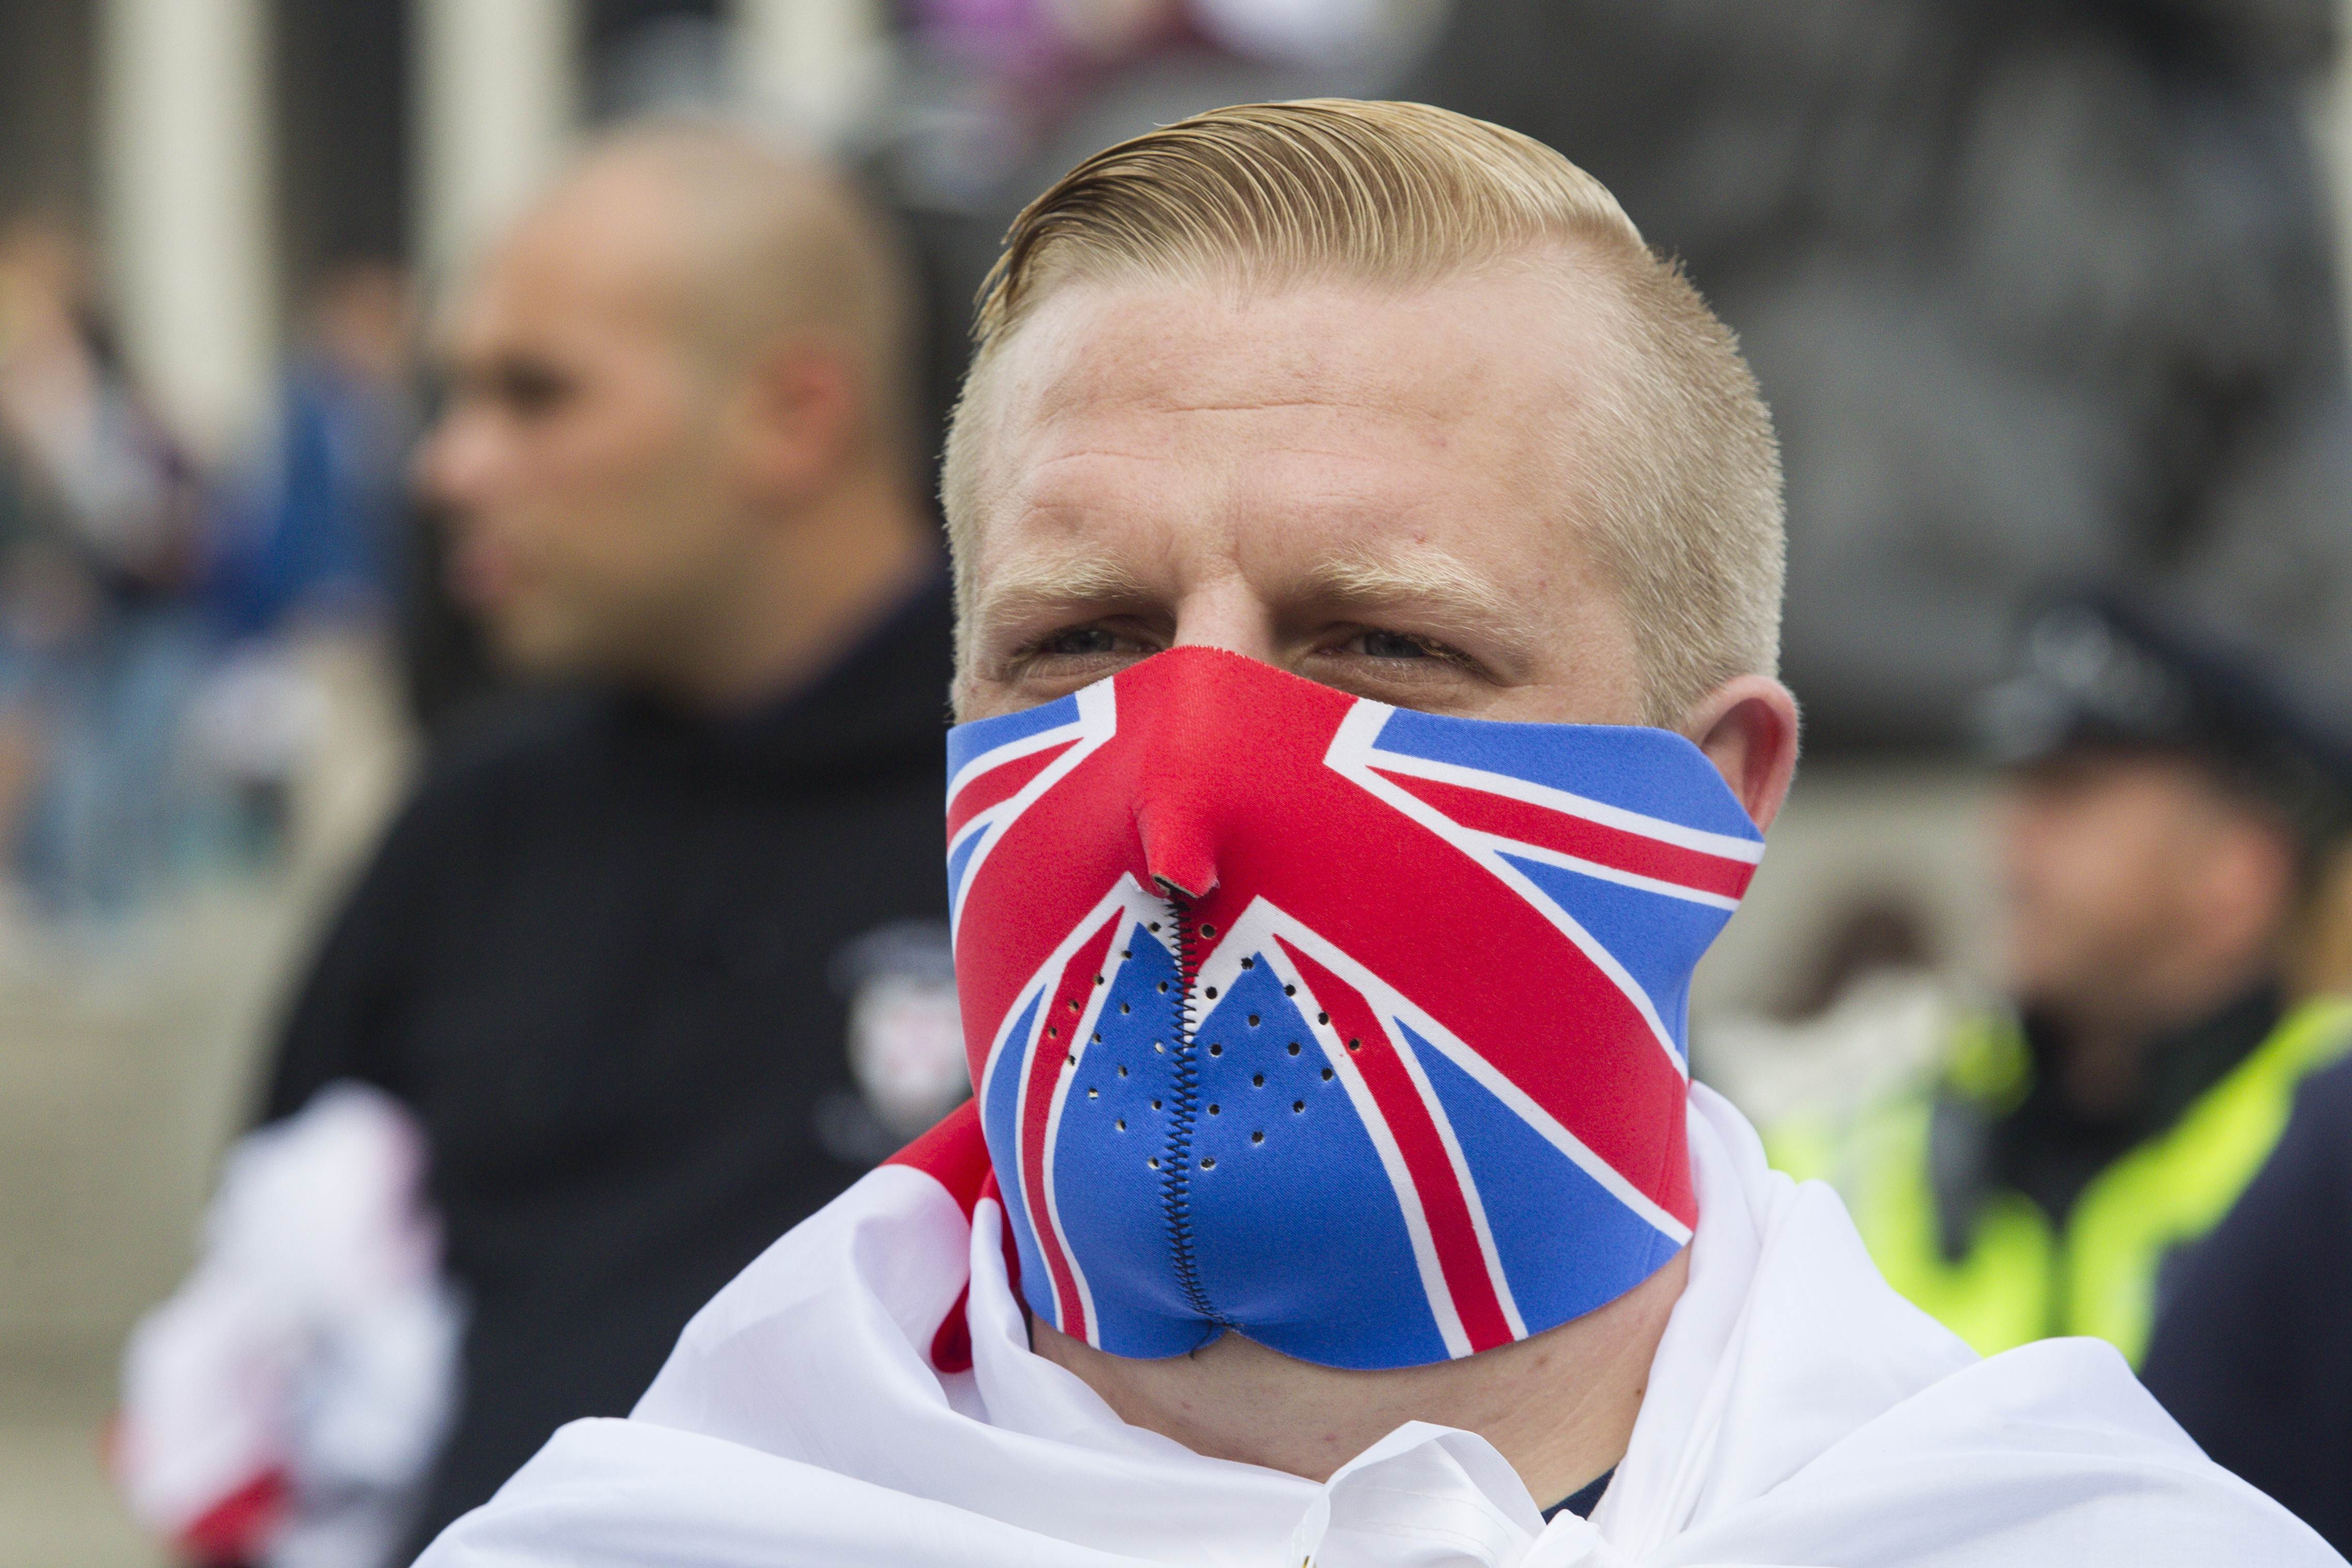 A supporter of the far-right English Defence League at a protest in London last September. Photo: AFP